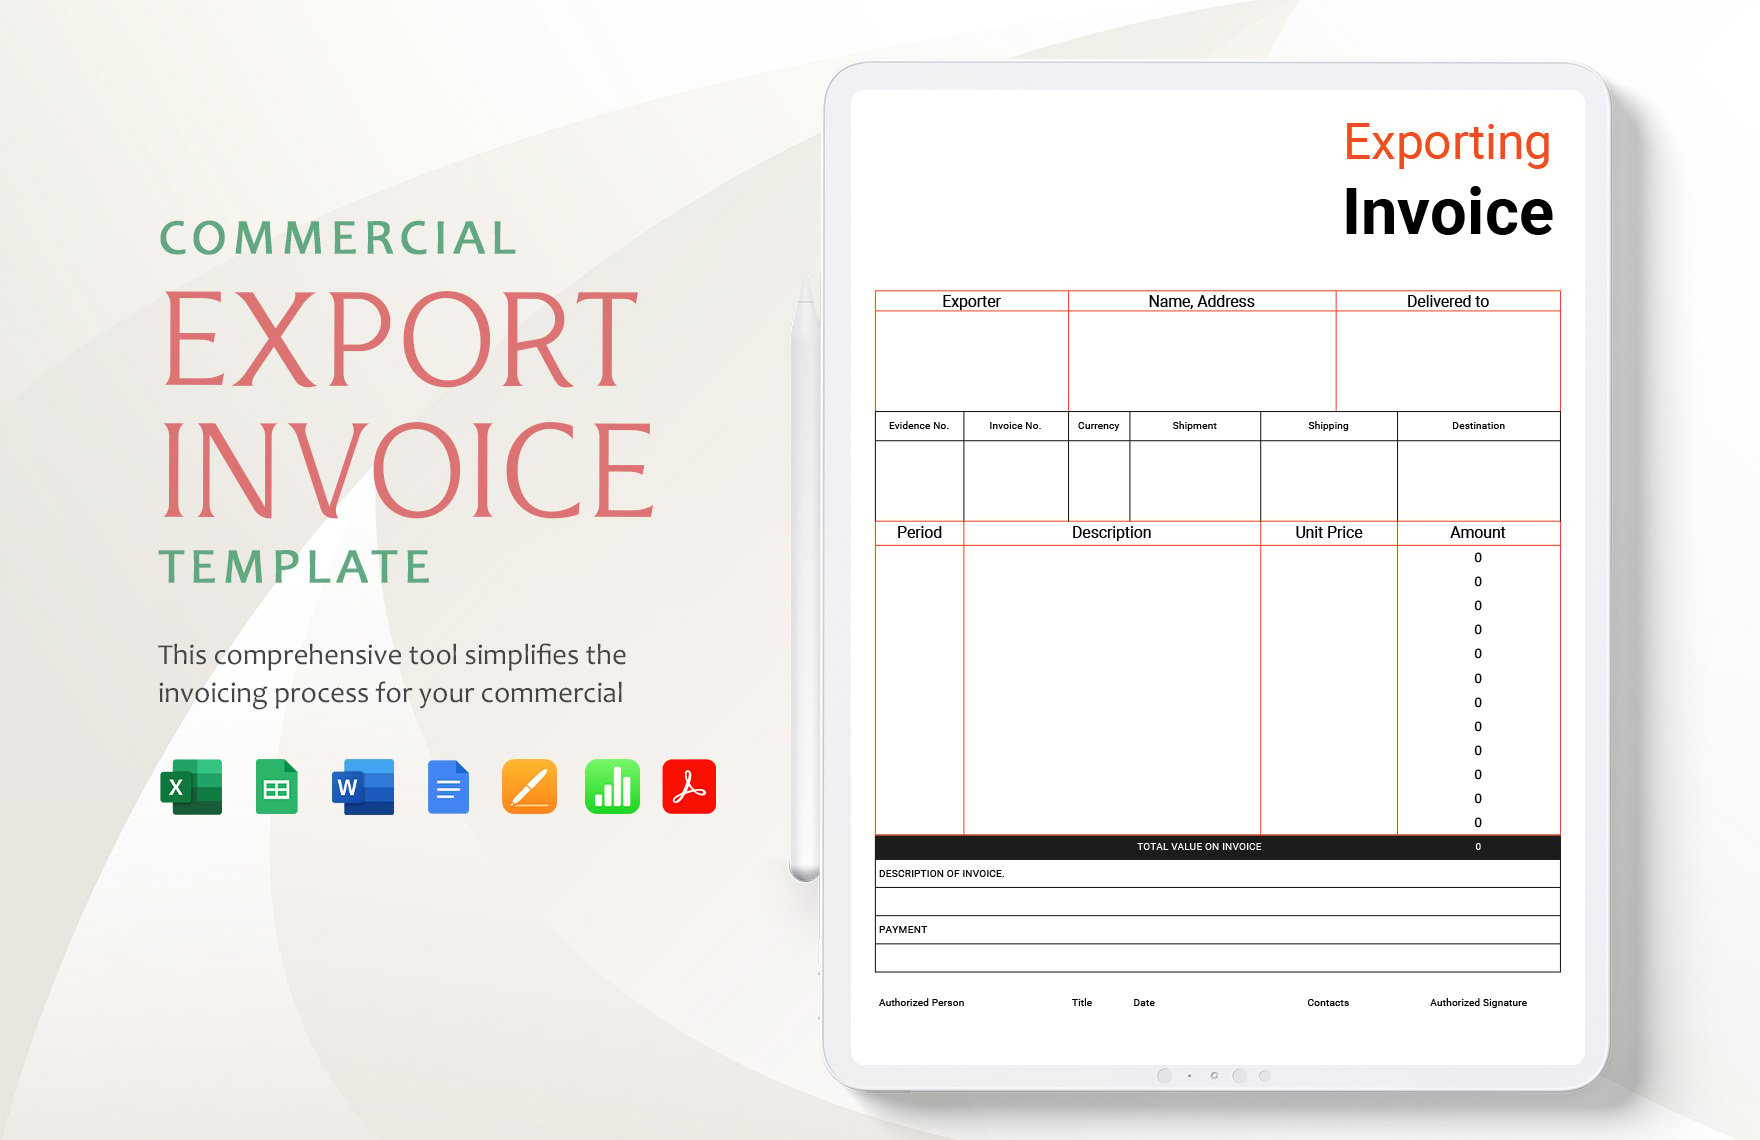 Commercial Export Invoice Template in Word, Google Docs, Excel, PDF, Google Sheets, Illustrator, PSD, Apple Pages, Apple Numbers